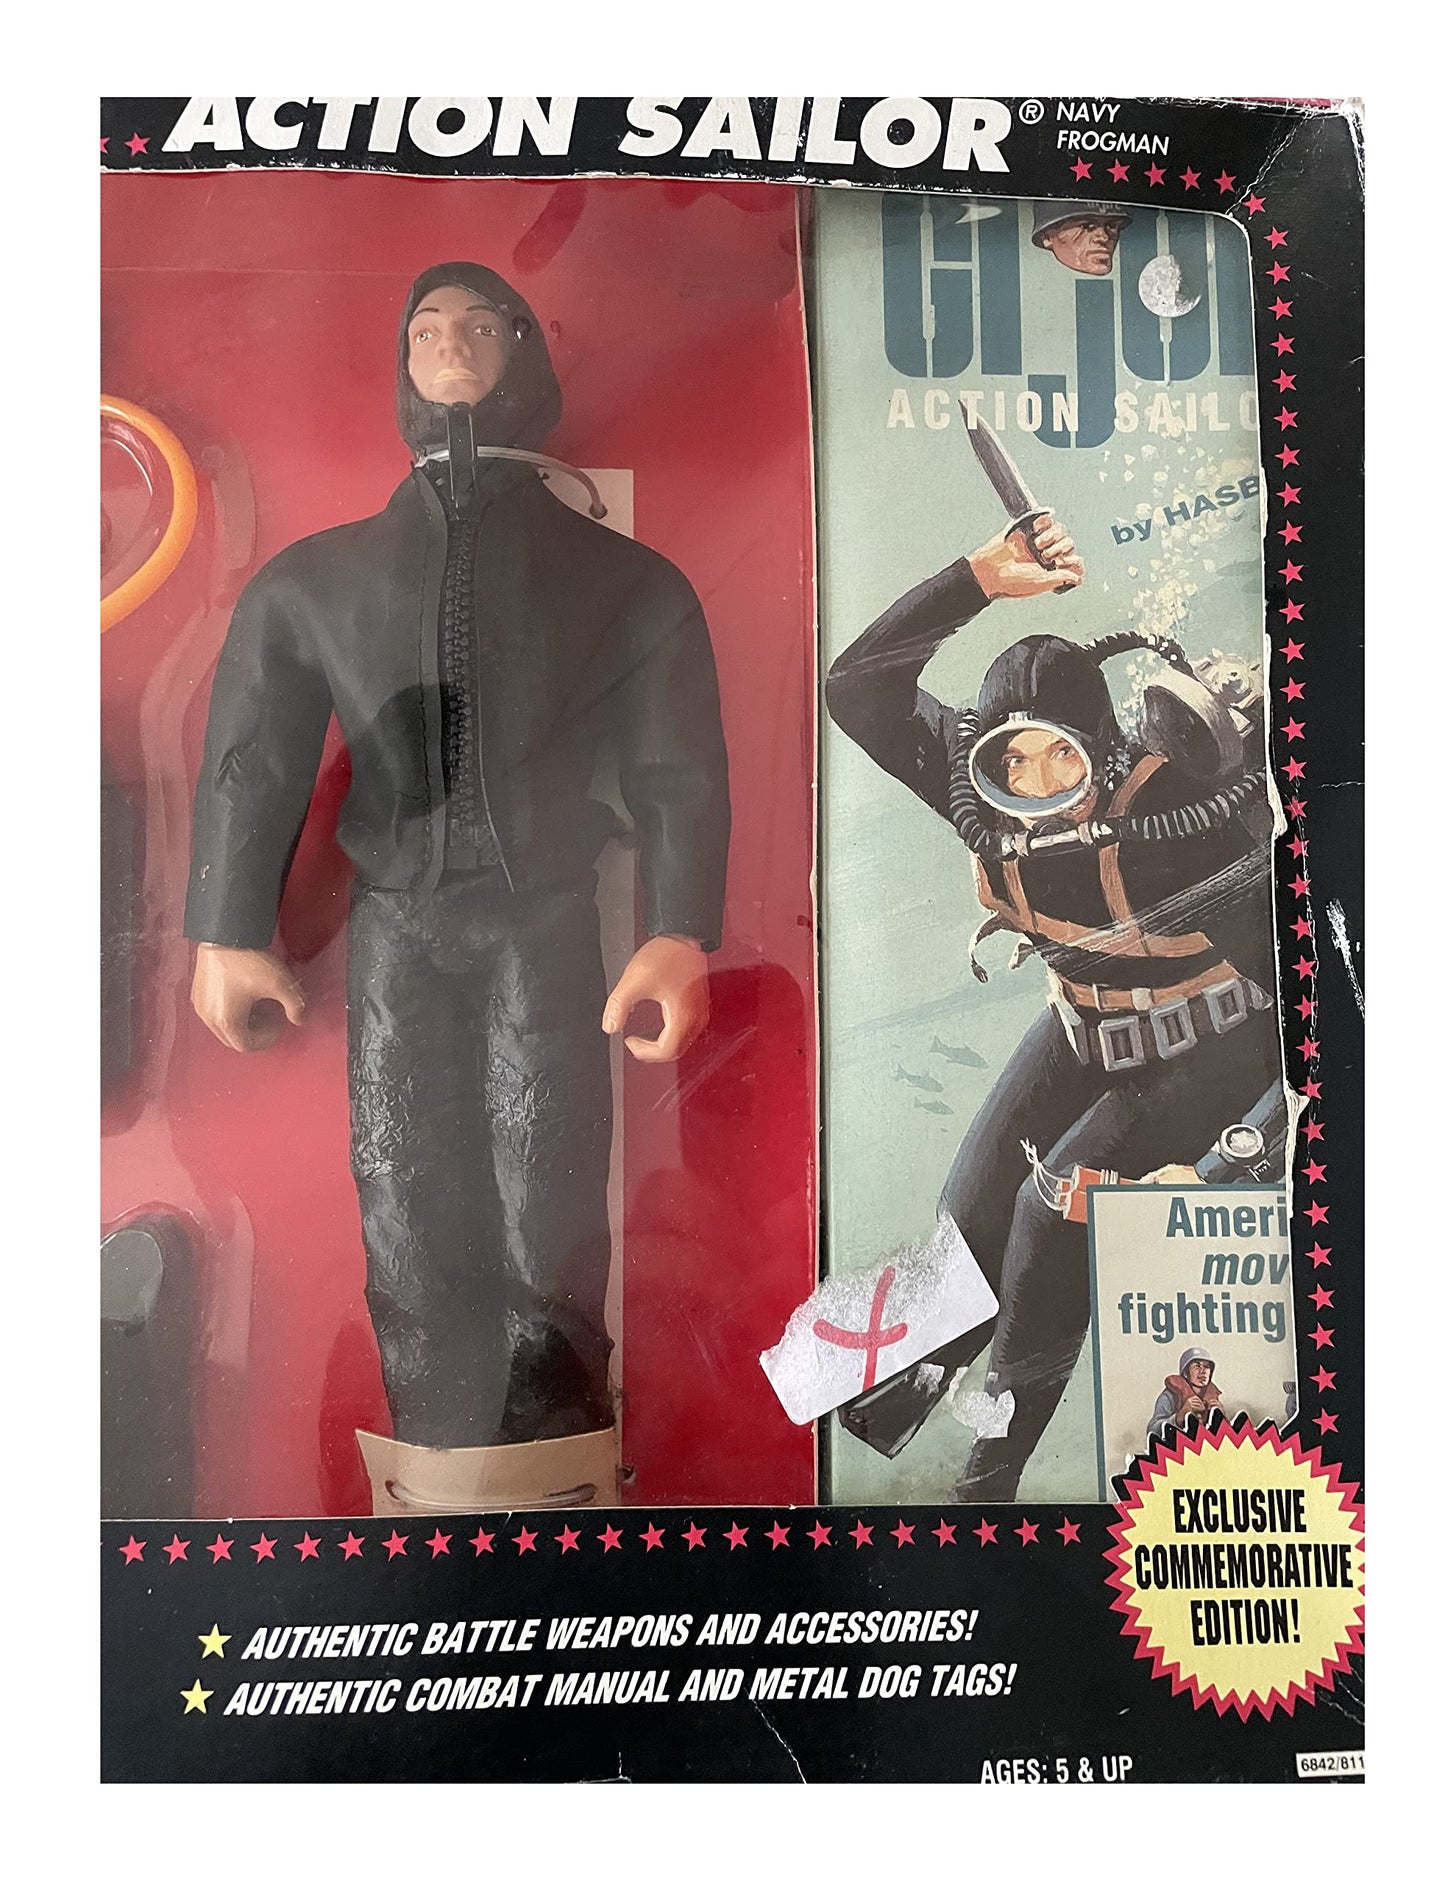 Vintage GI Joe 30th Anniversary Limited Collectors Edition Authentic 1964 - 1994 12" Fully Poseable Action Man Navy Frogman Figure and Accessories Box Set - Factory Sealed Shop Stock Room Find